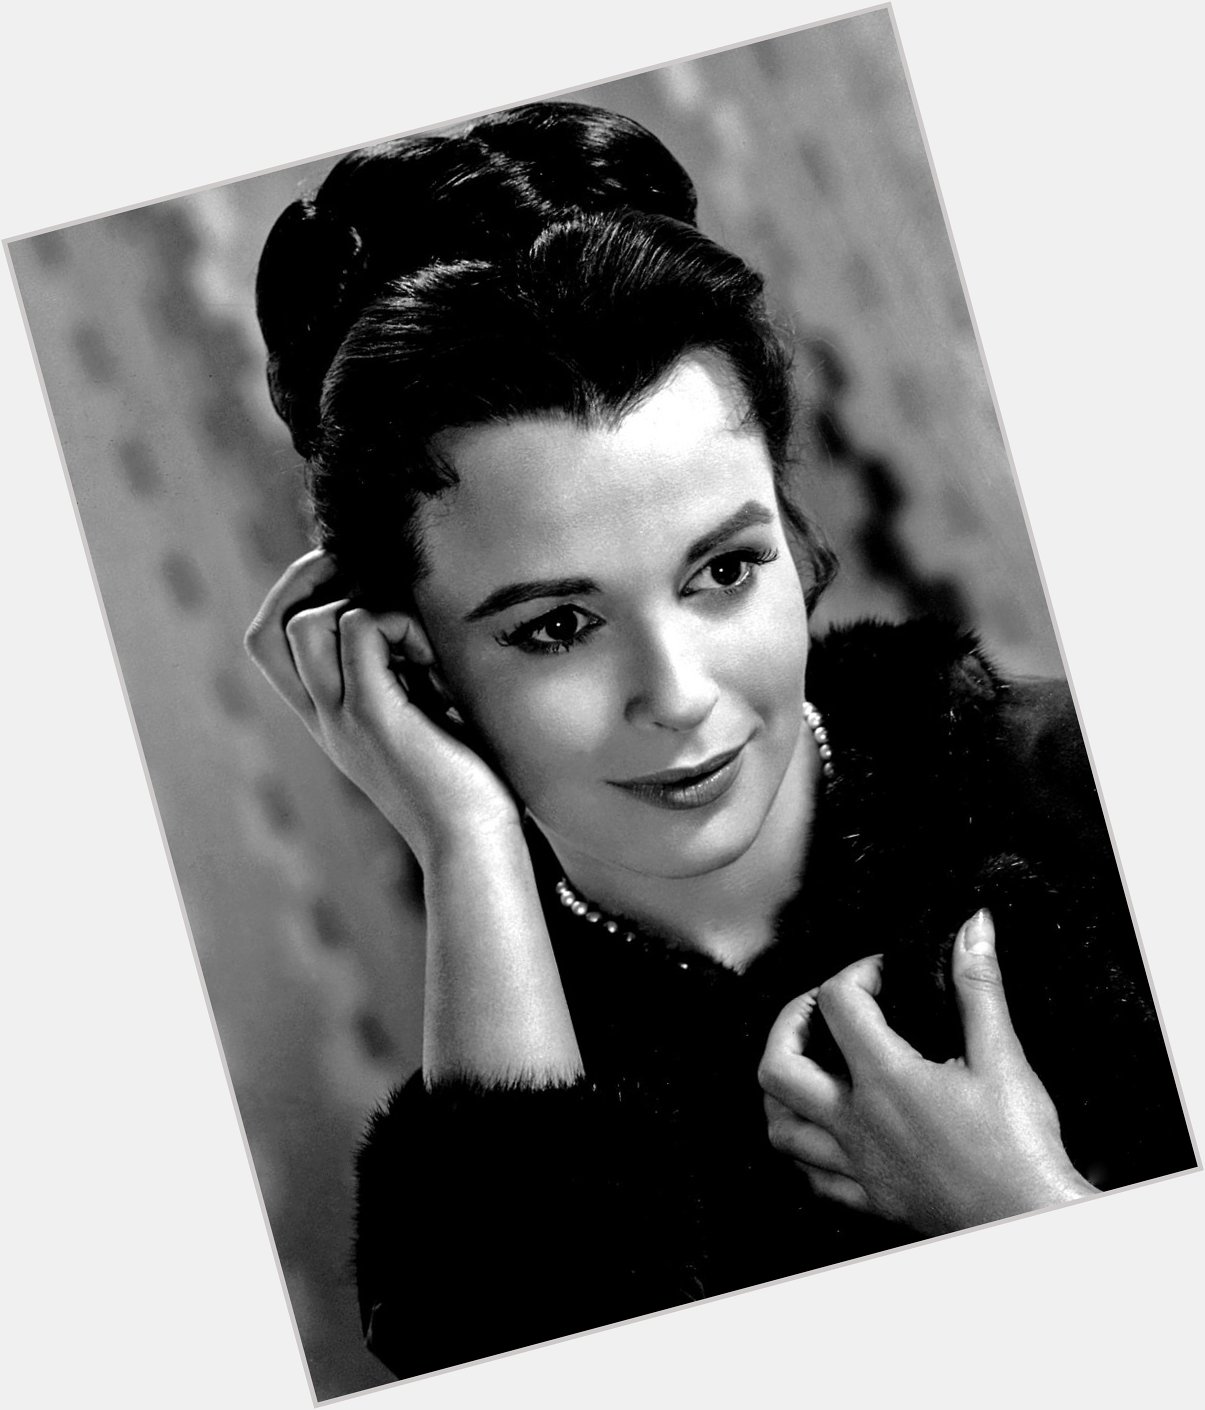 Happy Birthday, Claire Bloom! Born 15 February 1931 in Finchley, England 